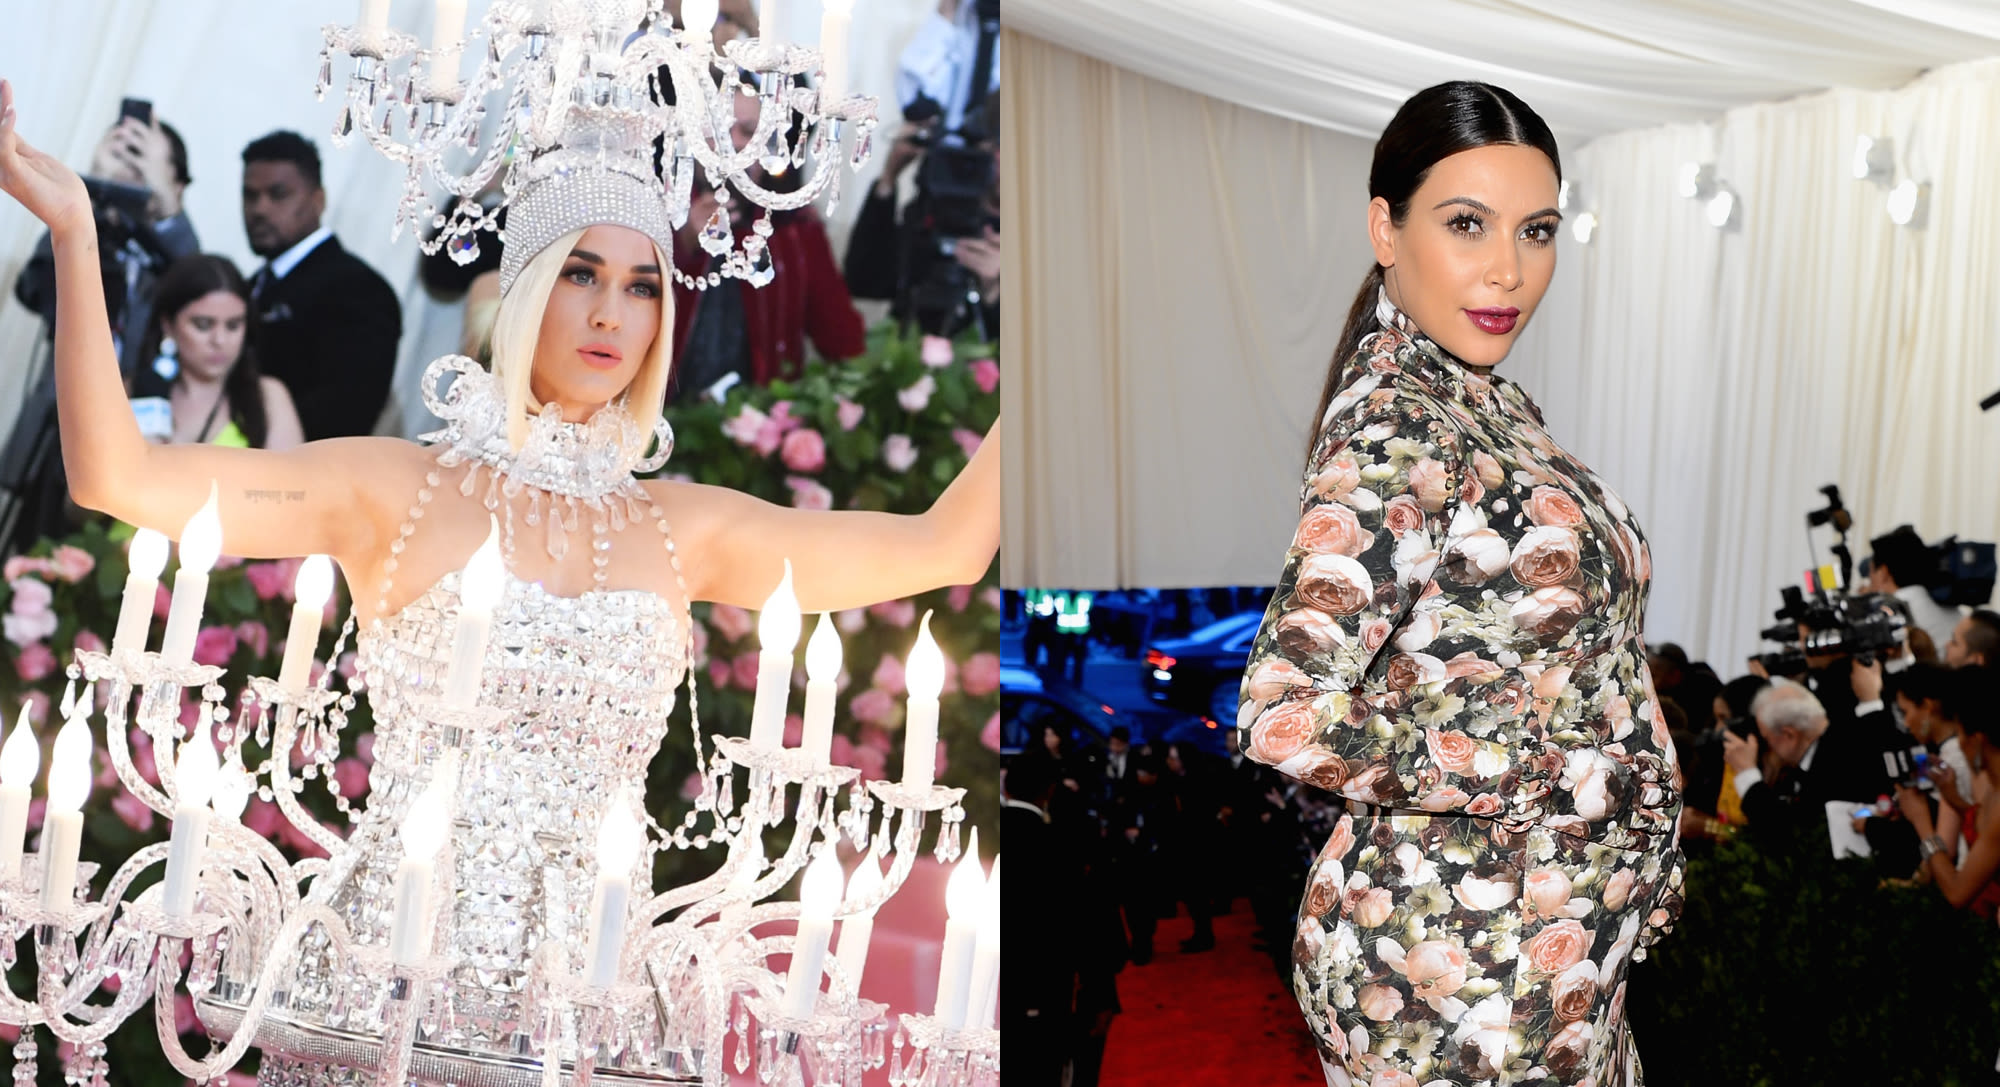 The Worst Dressed Stars in Met Gala History: Katy Perry, Kim Kardashian and More